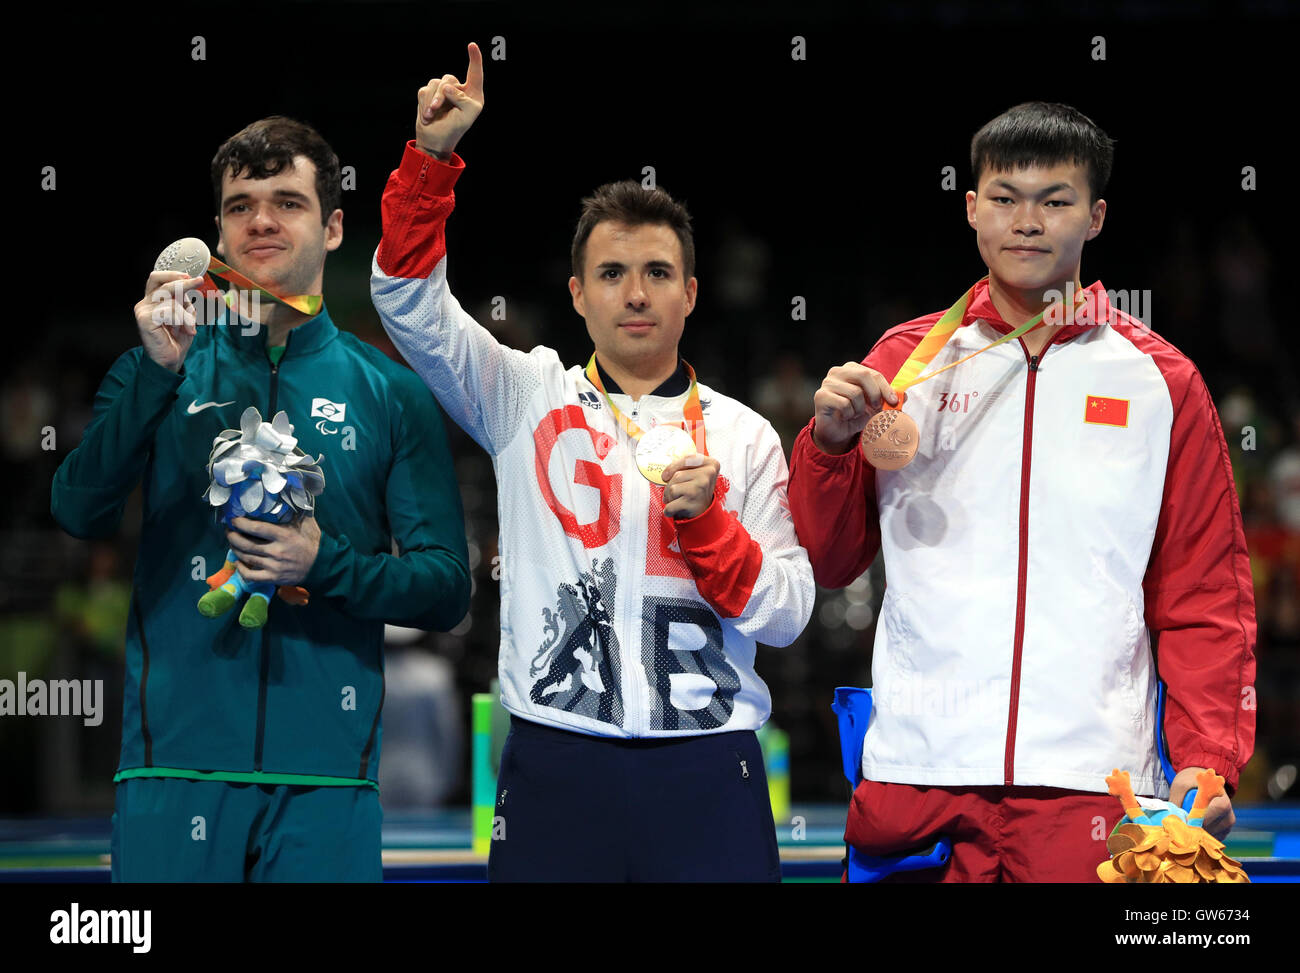 (left-right) Brazil's Israel Pereira Stroh, Great Britain's Will Bayley and China's Shuo Yan take to the podium after the Class 7 Mens Singles Table Tennis Gold Medal Match, during the fifth day of the 2016 Rio Paralympic Games in Rio de Janeiro, Brazil. Stock Photo